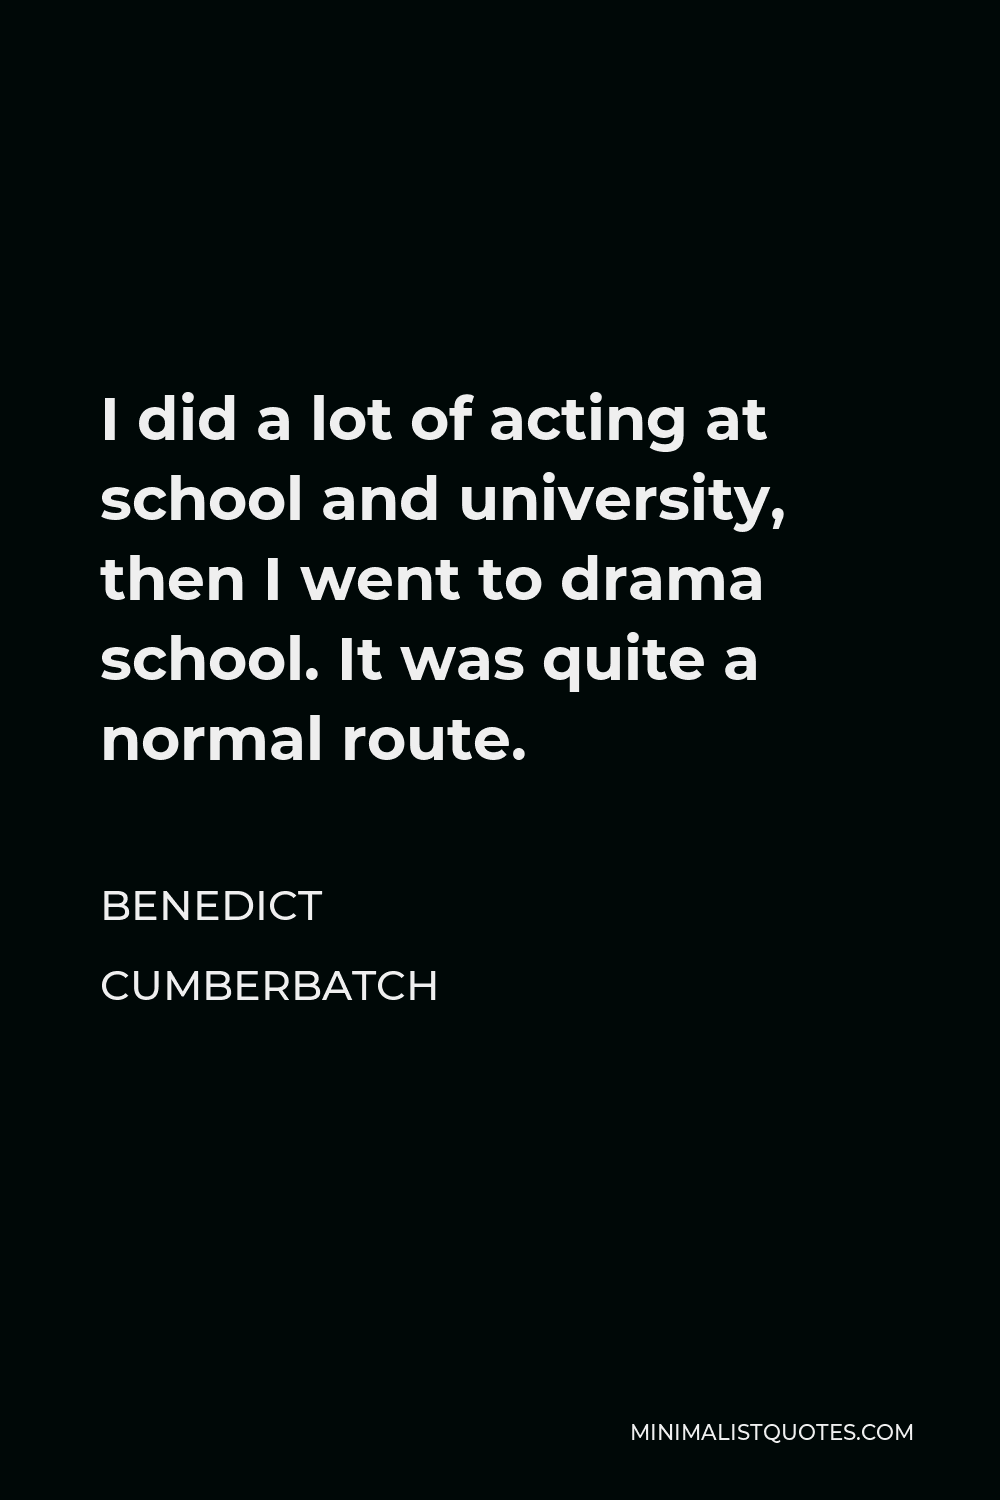 Benedict Cumberbatch Quote - I did a lot of acting at school and university, then I went to drama school. It was quite a normal route.